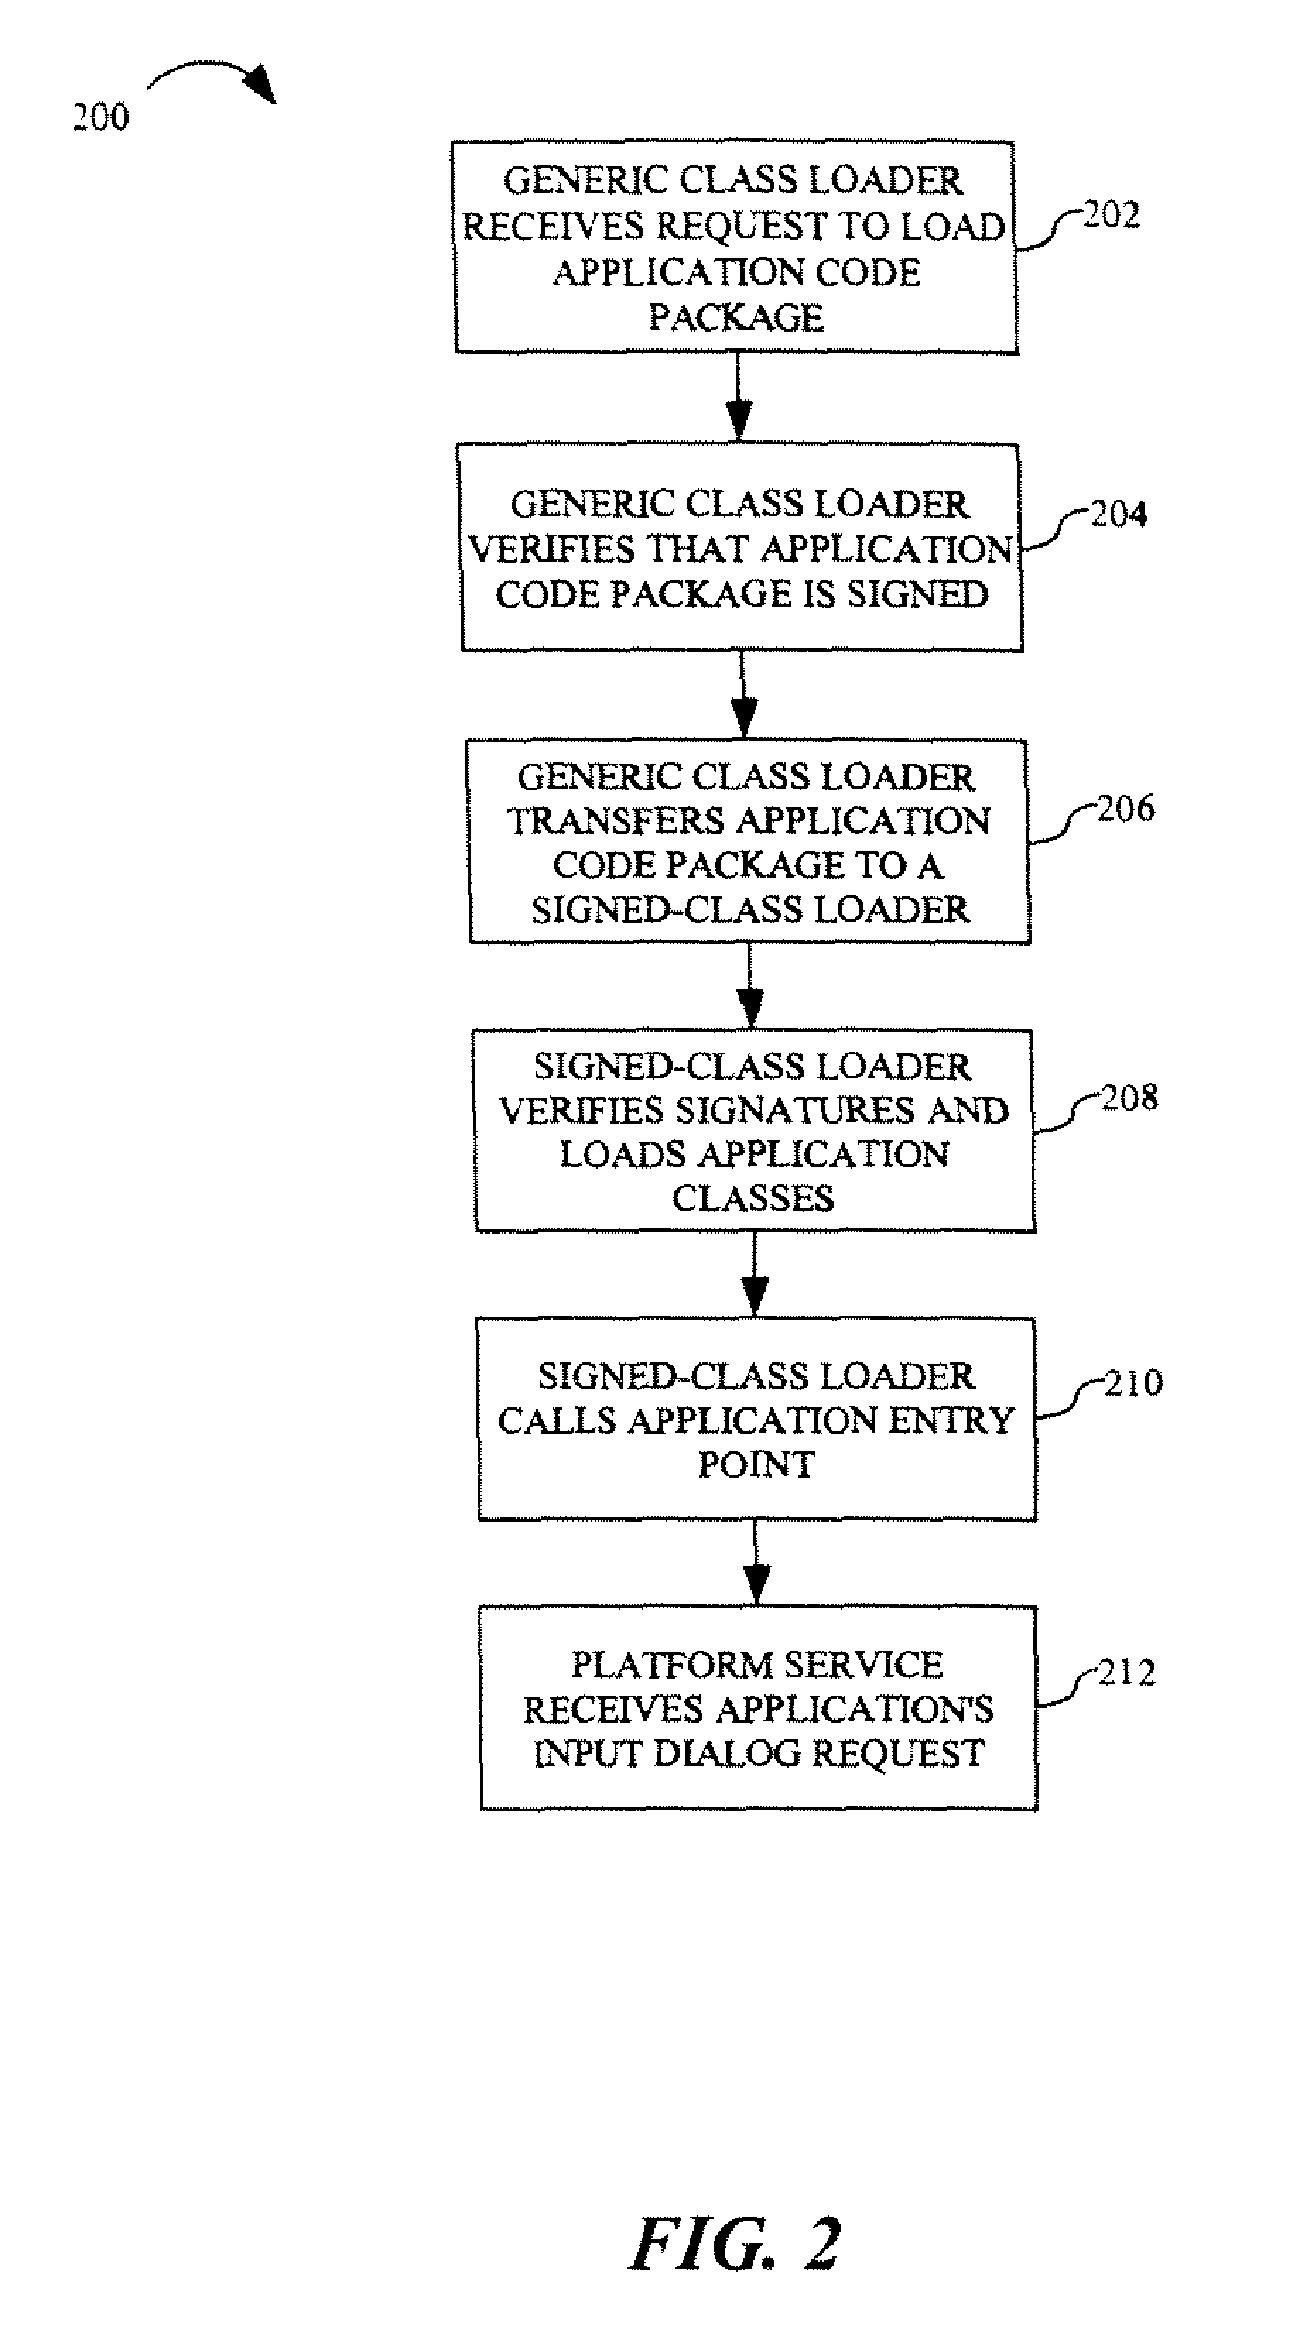 Method for enabling a trusted dialog for collection of sensitive data